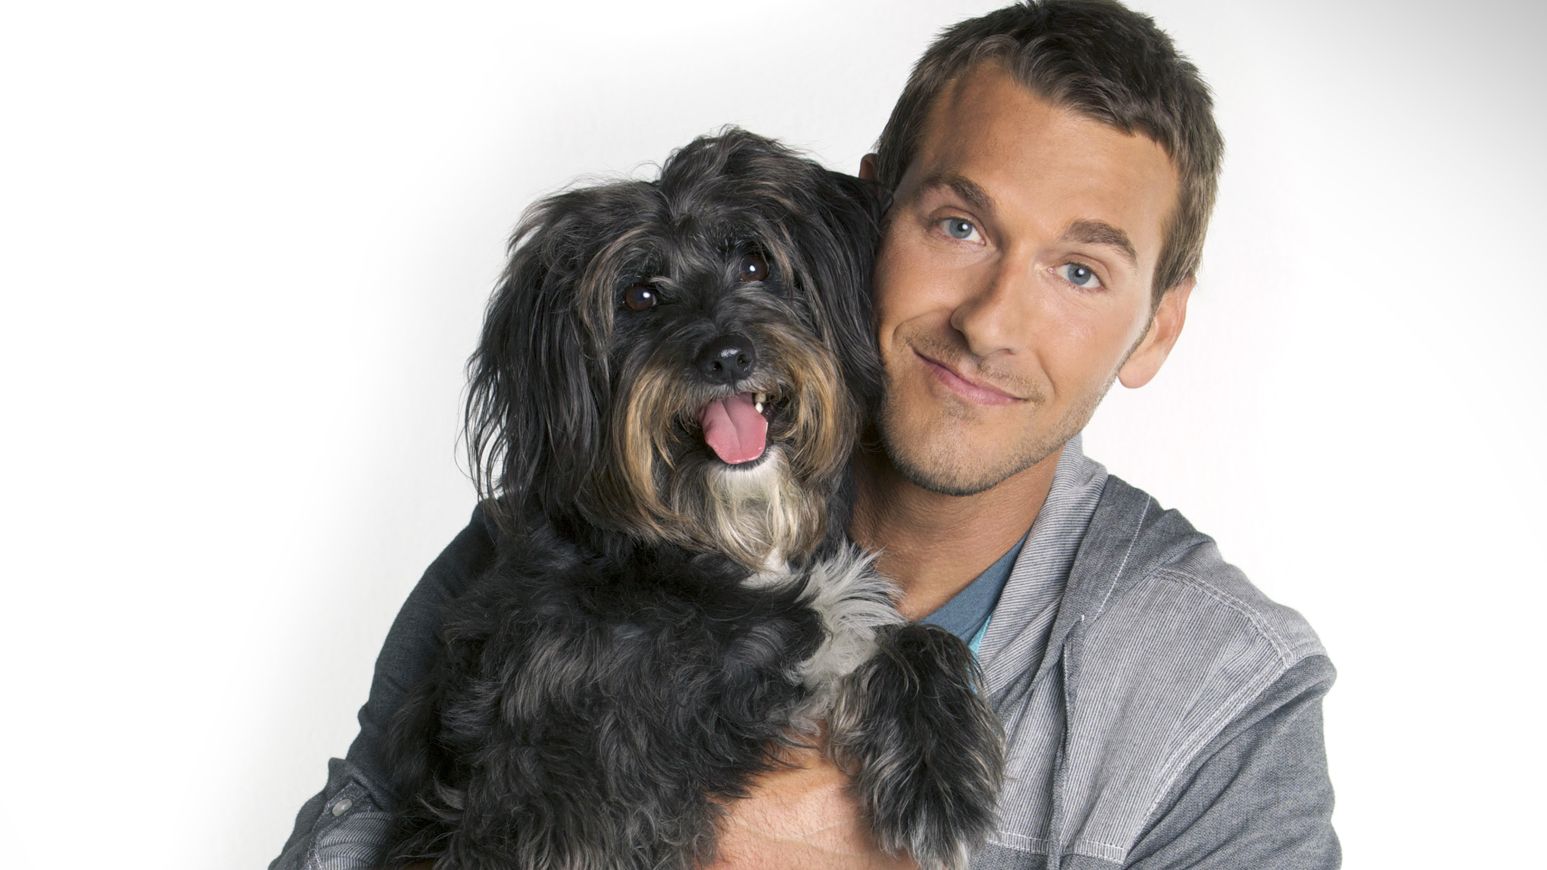 Dog Trainer Brandon McMillan on Working with Service Dogs - Guideposts